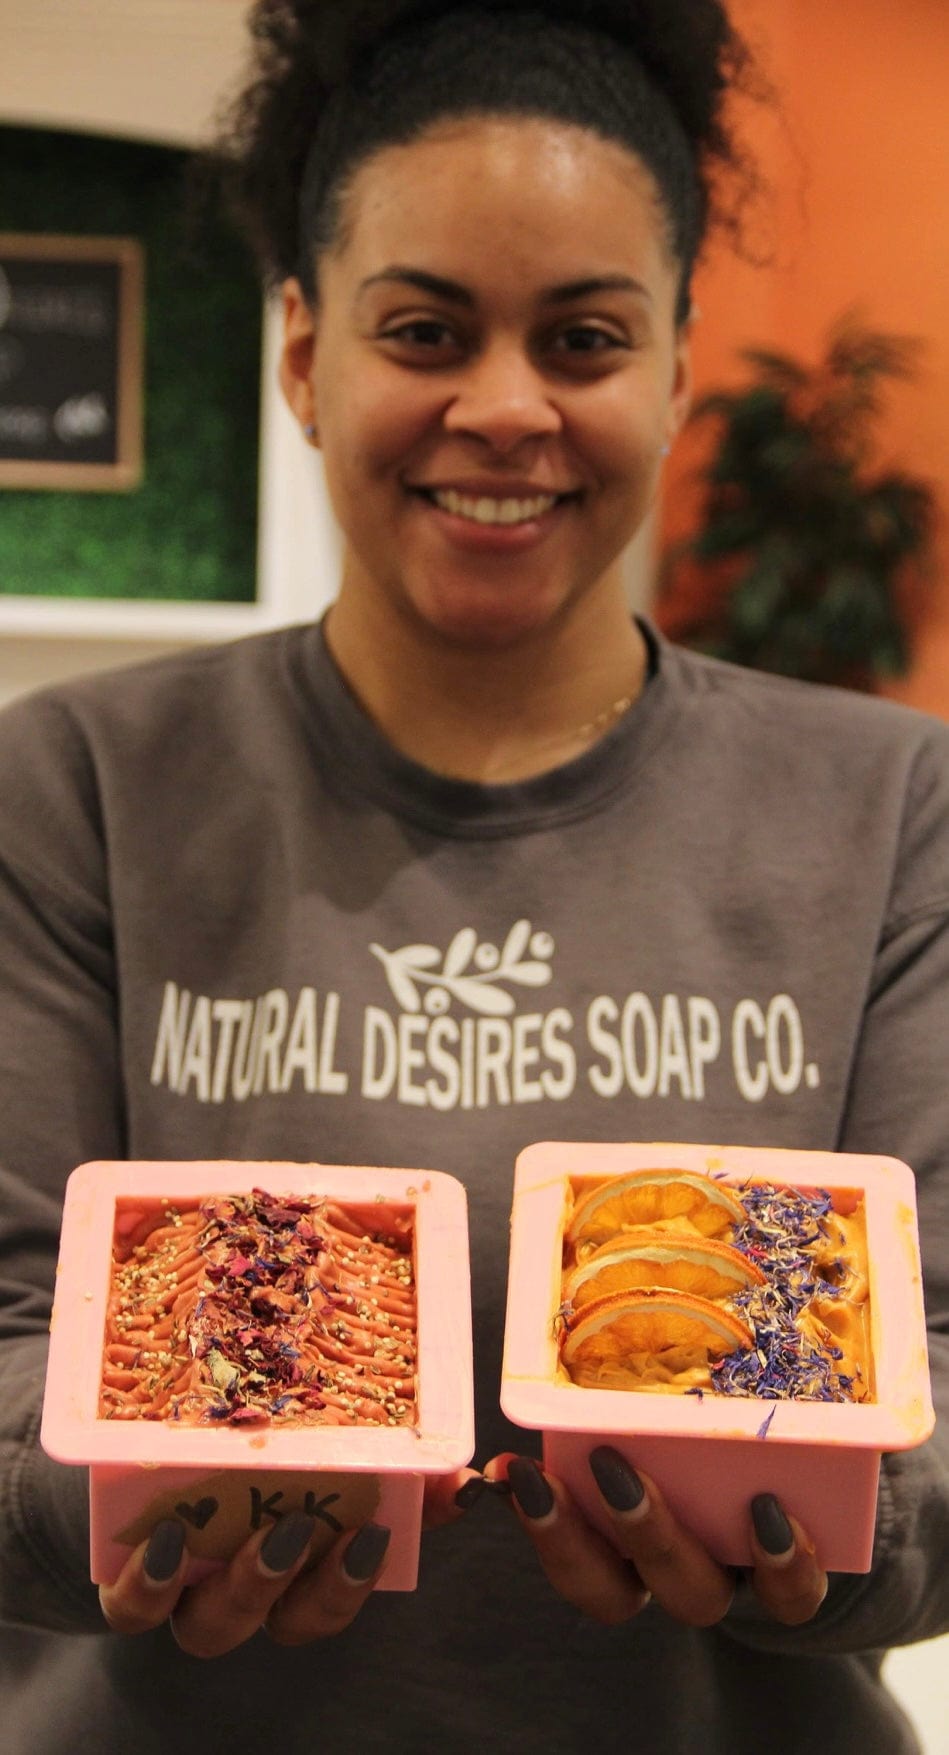 Mother's Day Soap Making Class May 12th 2:00 pm